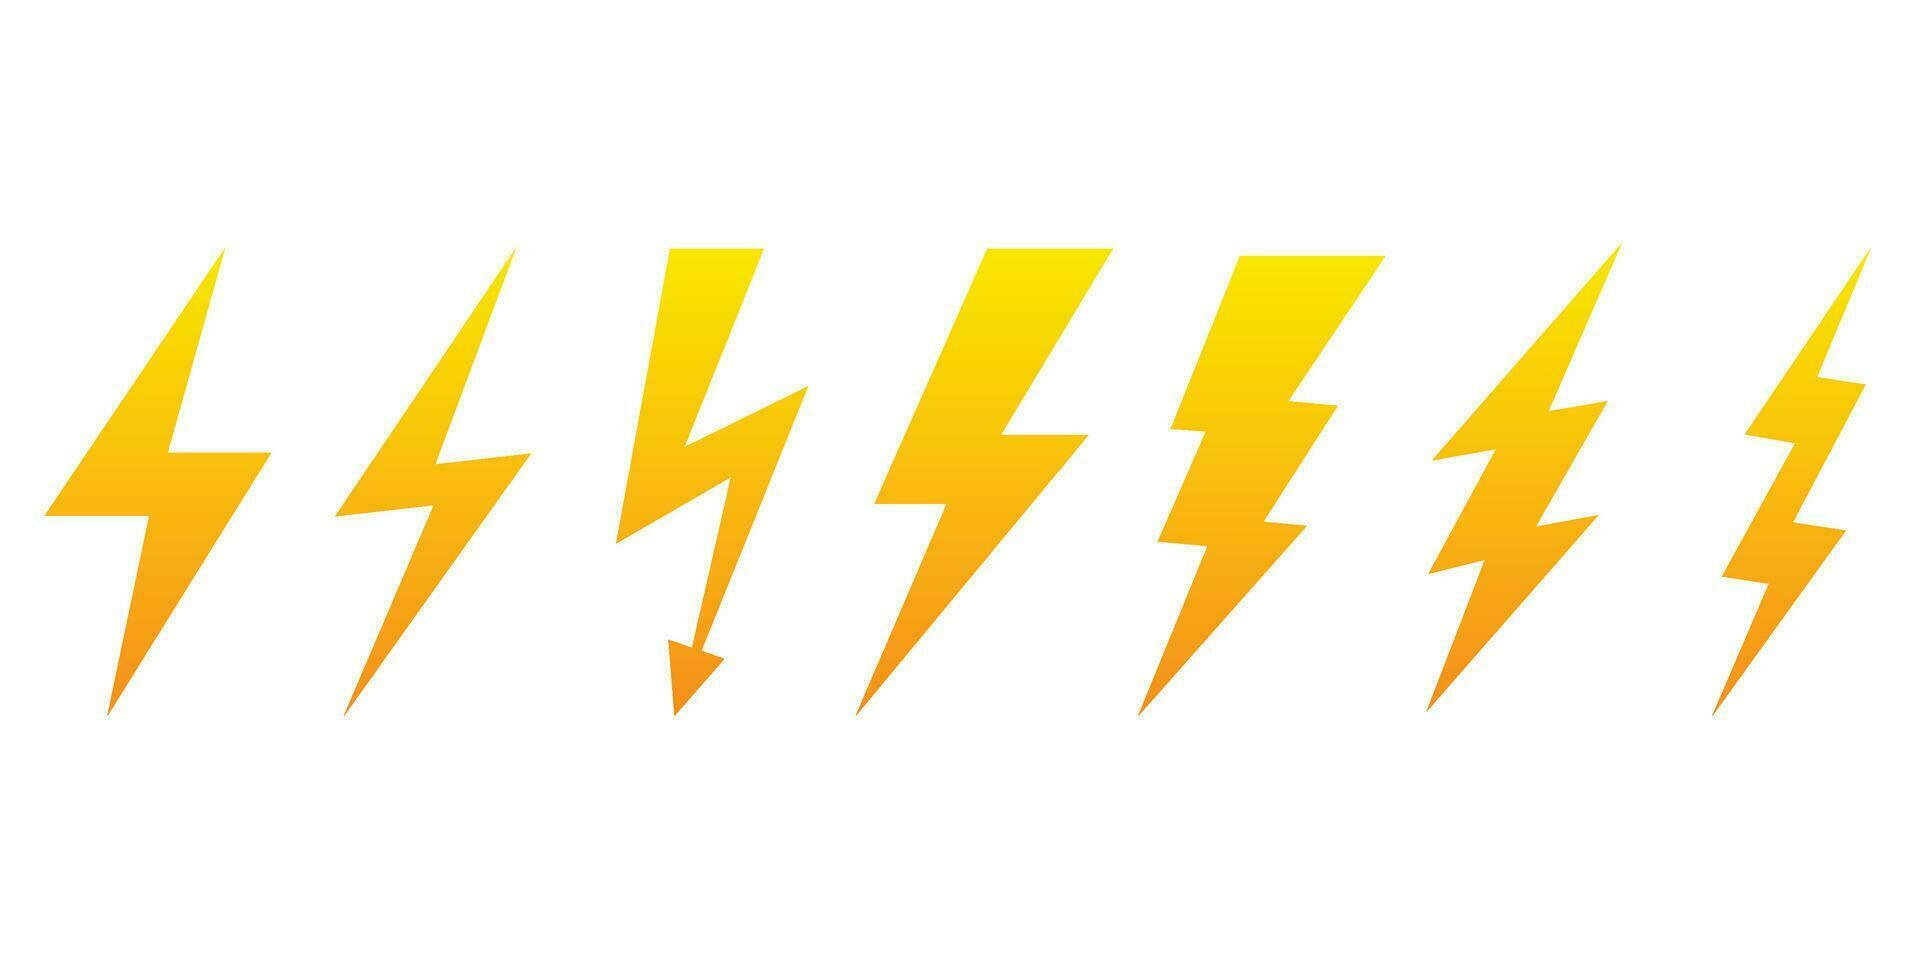 Lightning icon set. Electricity and power symbol. Thunder and Bolt. Flash icon. Lightning bolt. vector